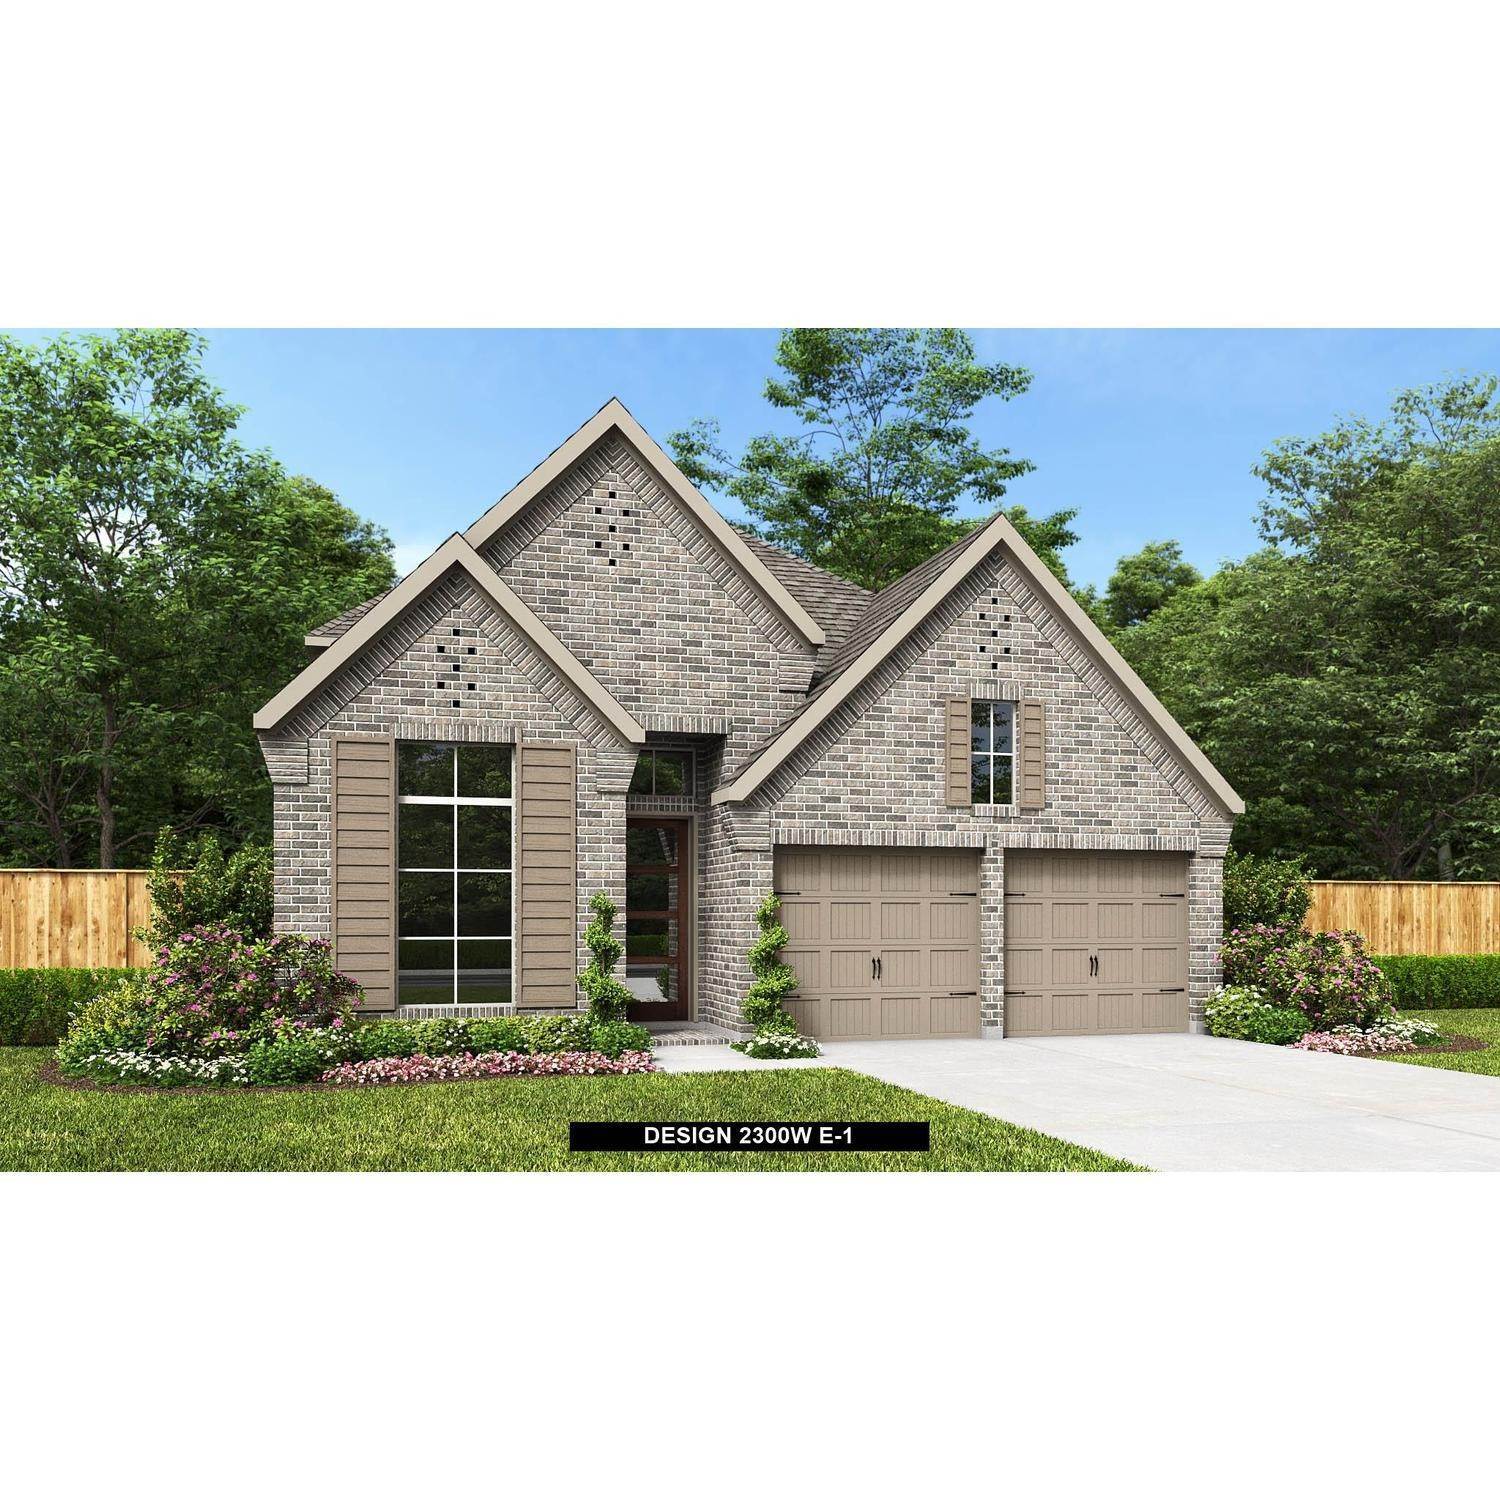 Single Family for Sale at The Highlands 45' 21715 Grayson Highlands Way, Porter, TX 77365